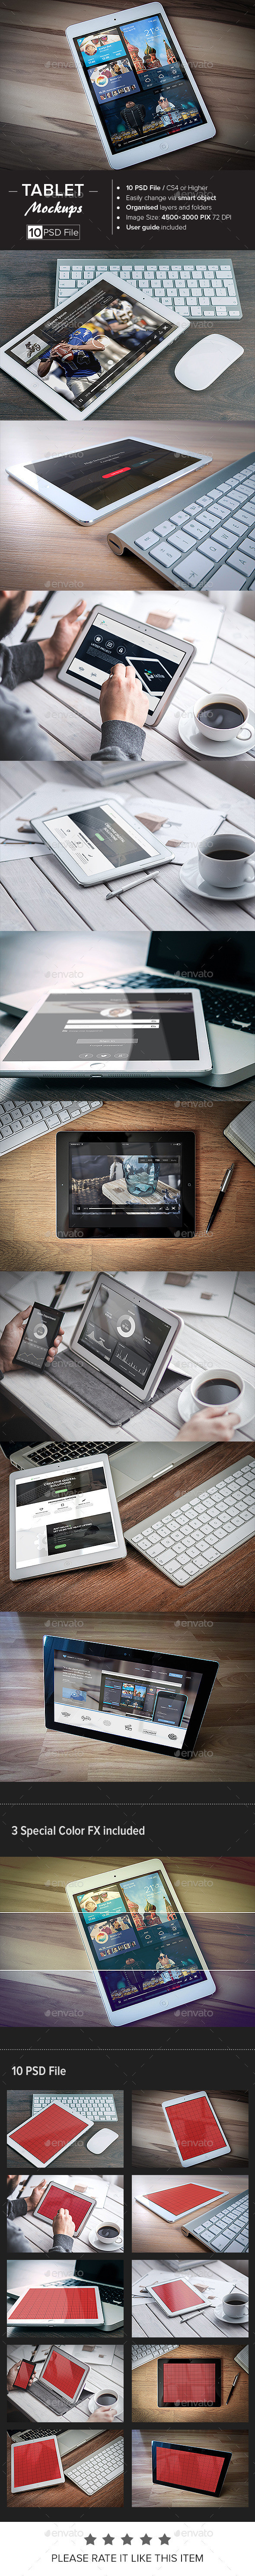 Tablet 20 mockup preview 20update 20psd